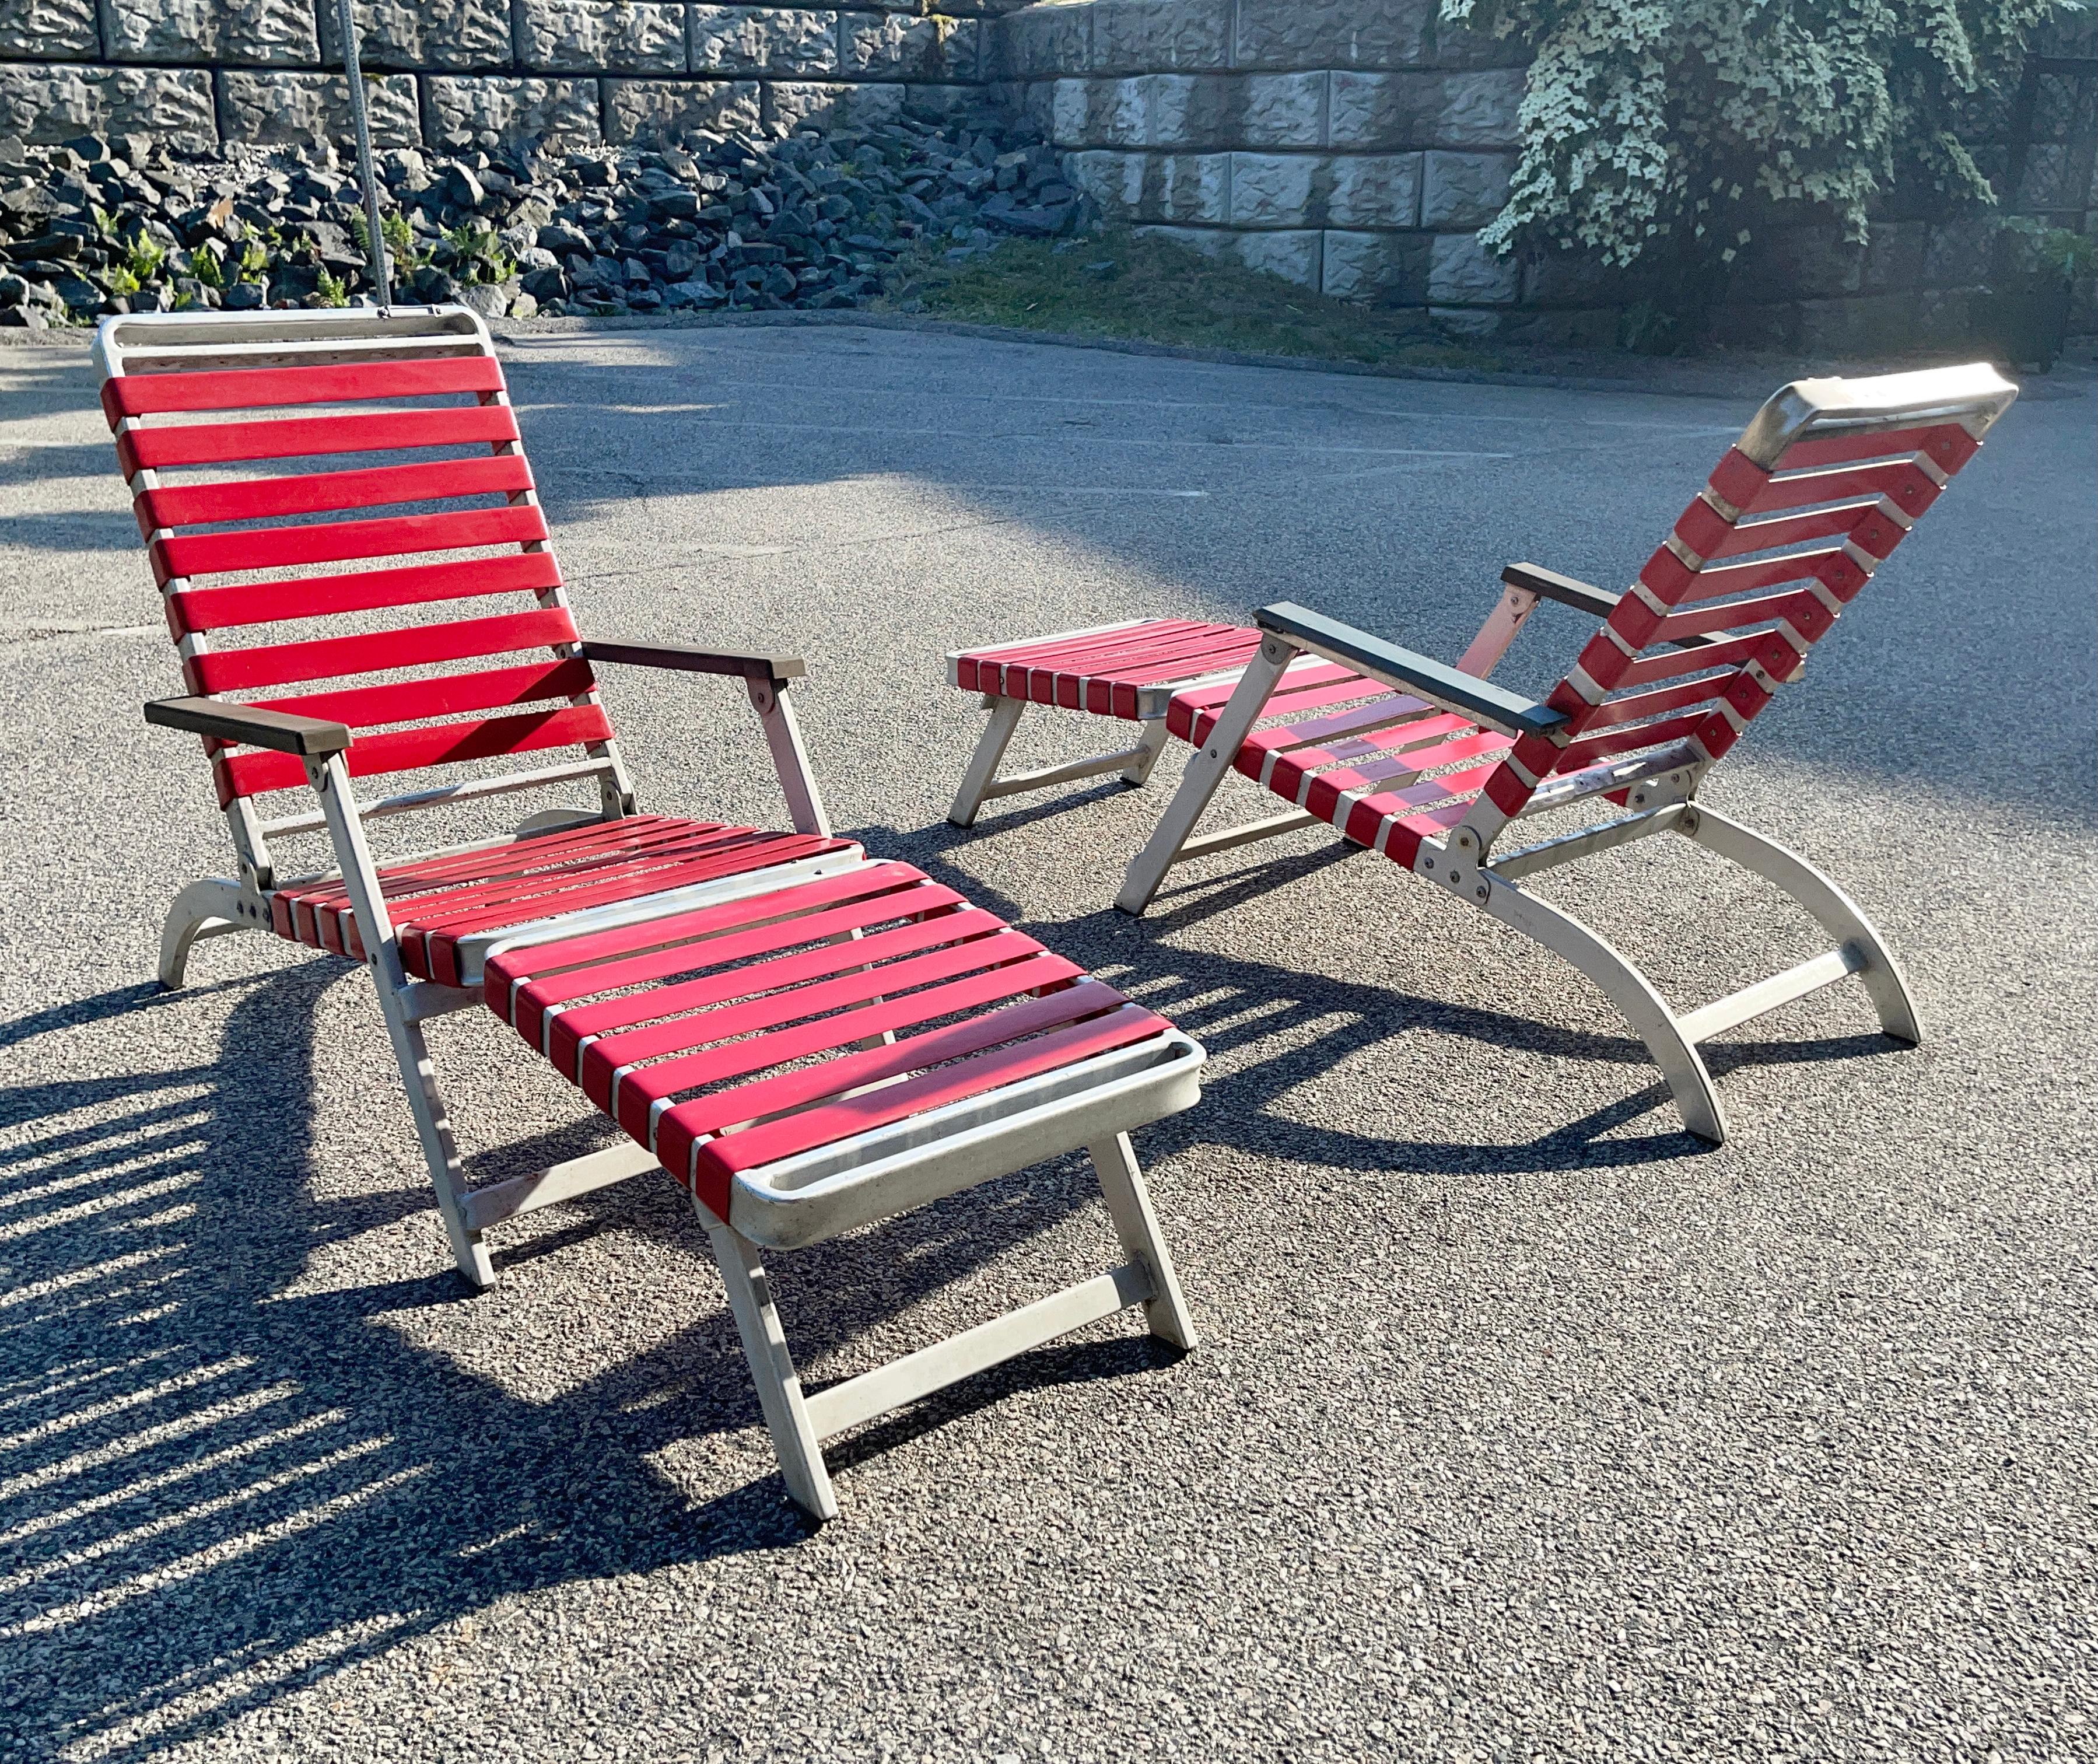 Mid-20th Century SS United States Pair of Folding Deck Chairs by Troy Sunshade Co.